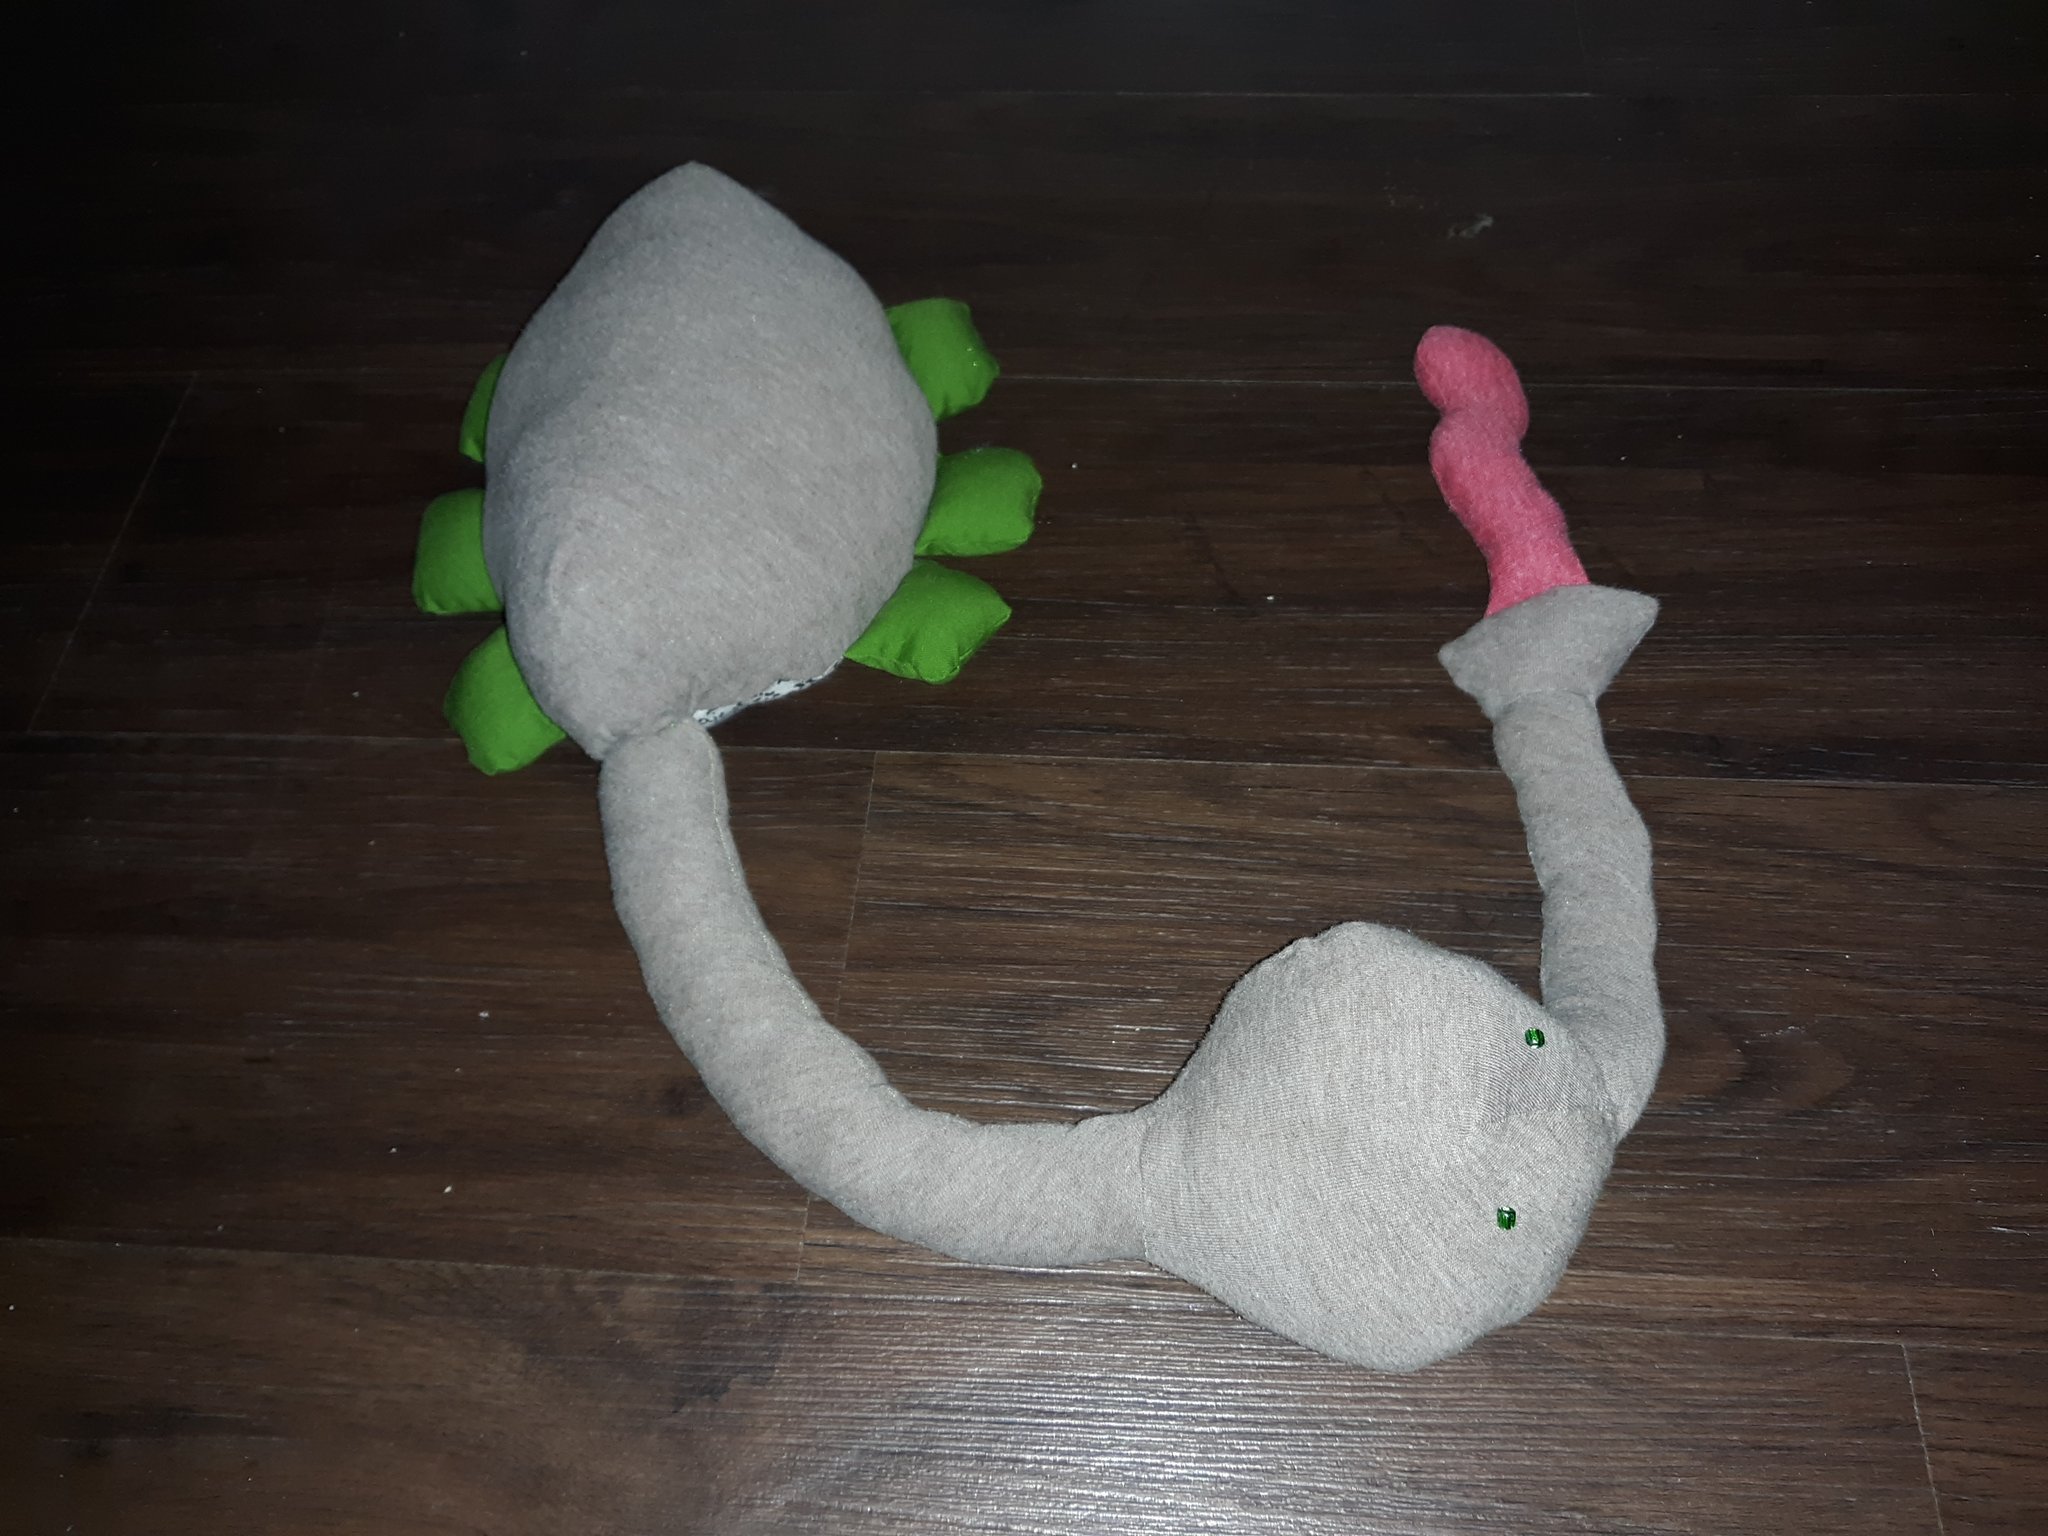 The top of a grey doll laying on the floor. It has a round grey body with a very long neck with a round head at the end of it. The head has a long snout coming out of it with a long red tongue coming out of that. The head has two small green beads for eyes. The body has six stubby green legs with three on each side.